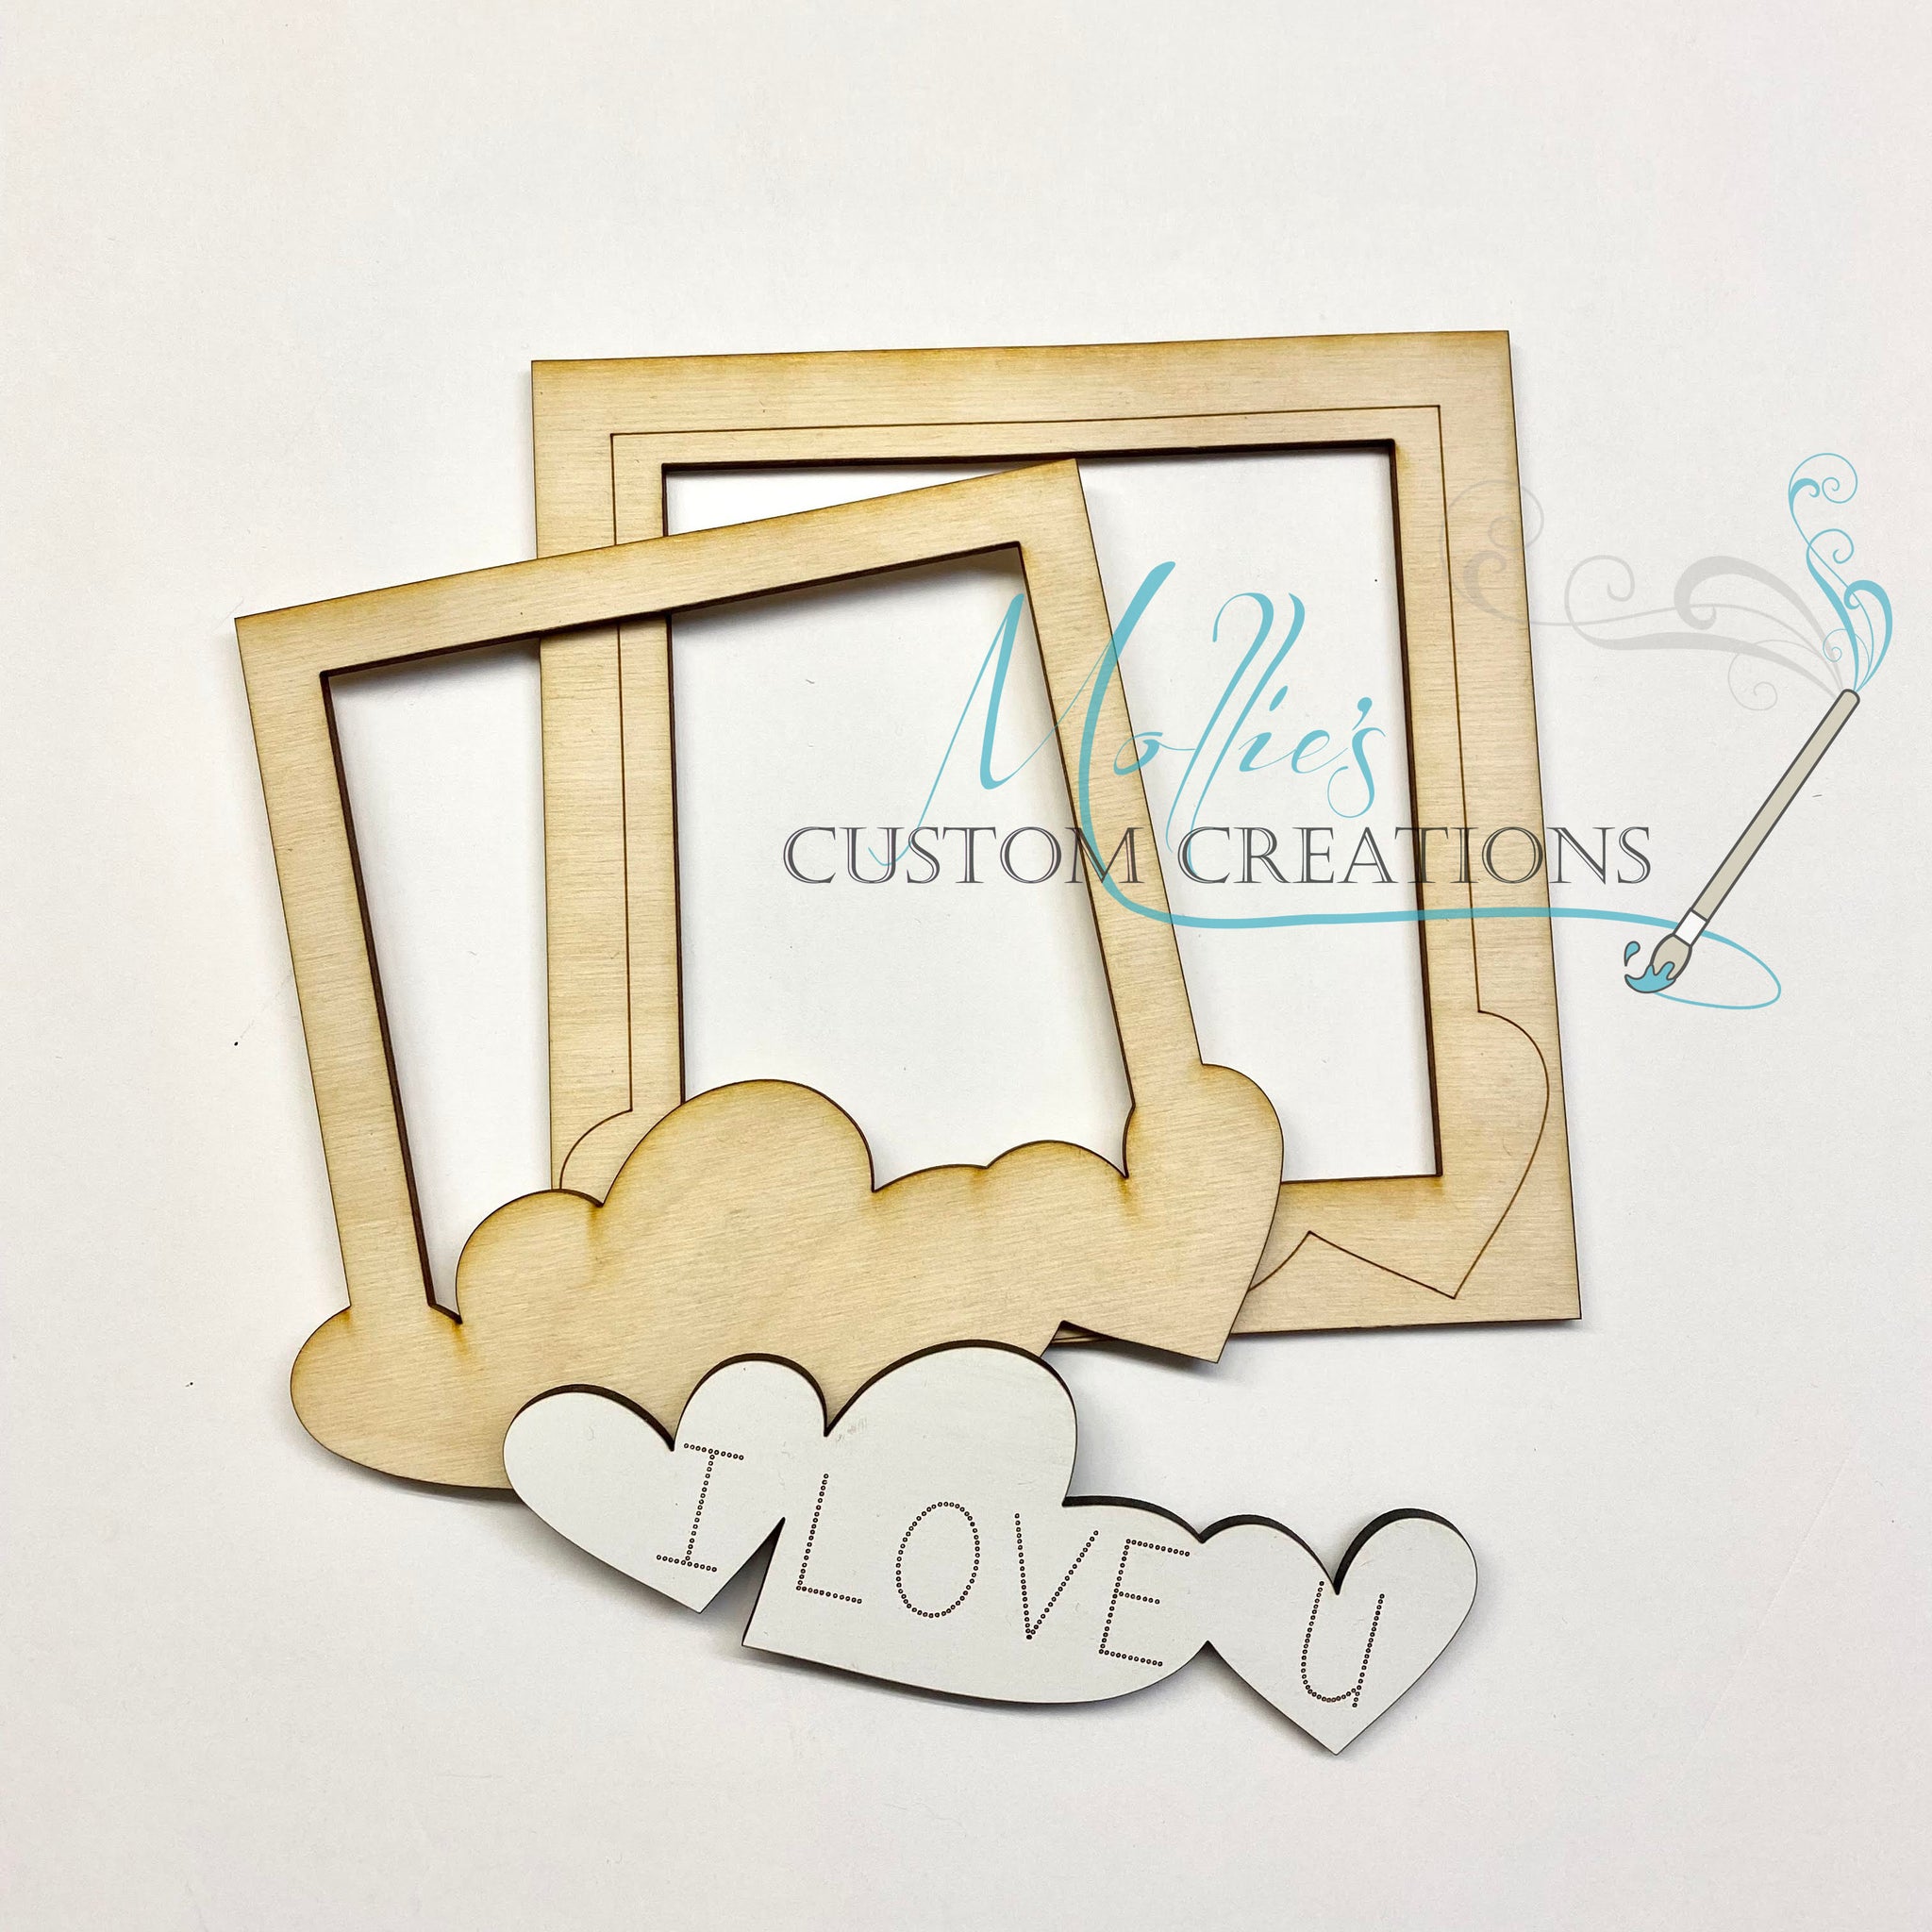 Family Handprint Rustic Photo Frame and Paint Kit - Store